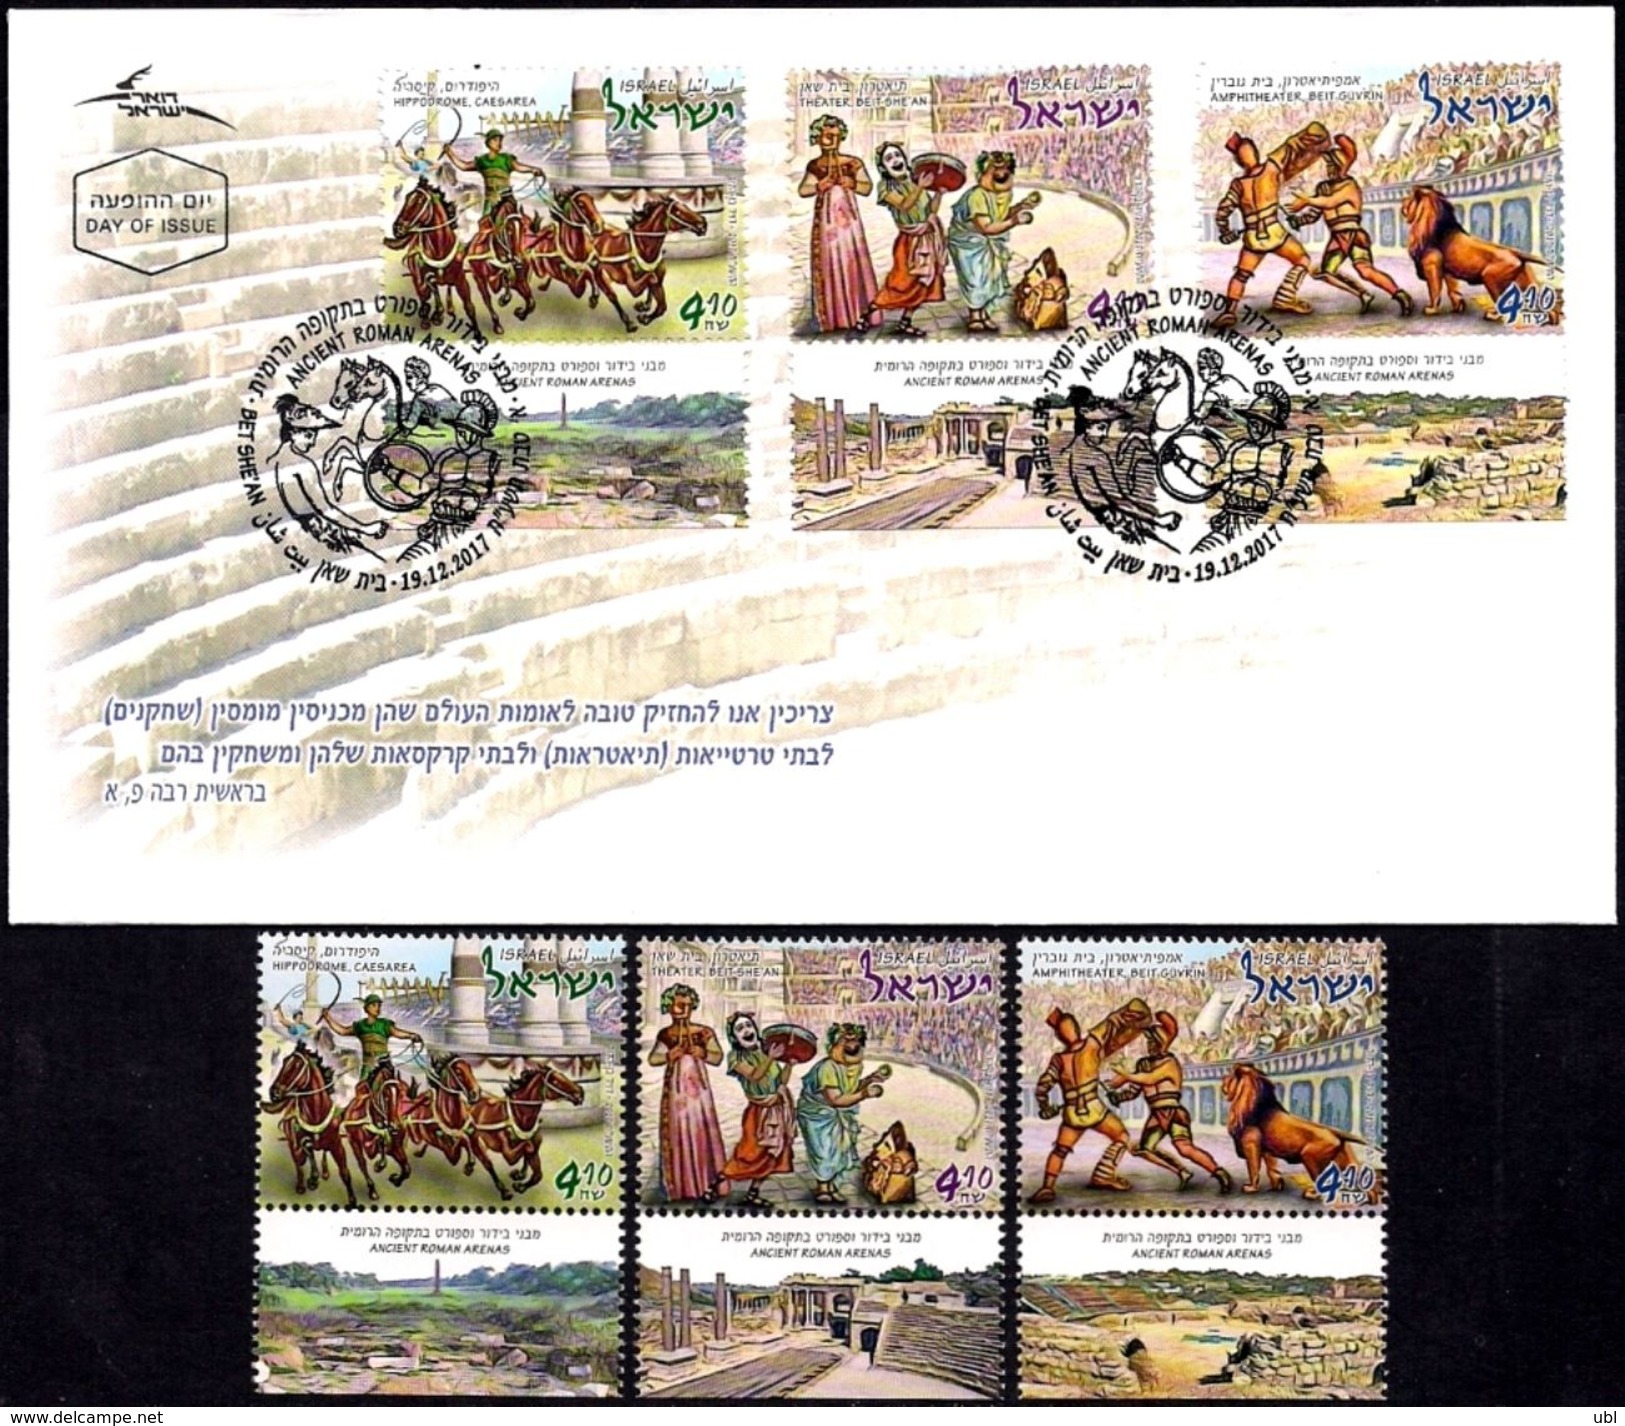 ISRAEL 2017 - Ancient Roman Arenas In Israel - A Set Of 3 Stamps With Tabs - MNH & FDC - Arqueología